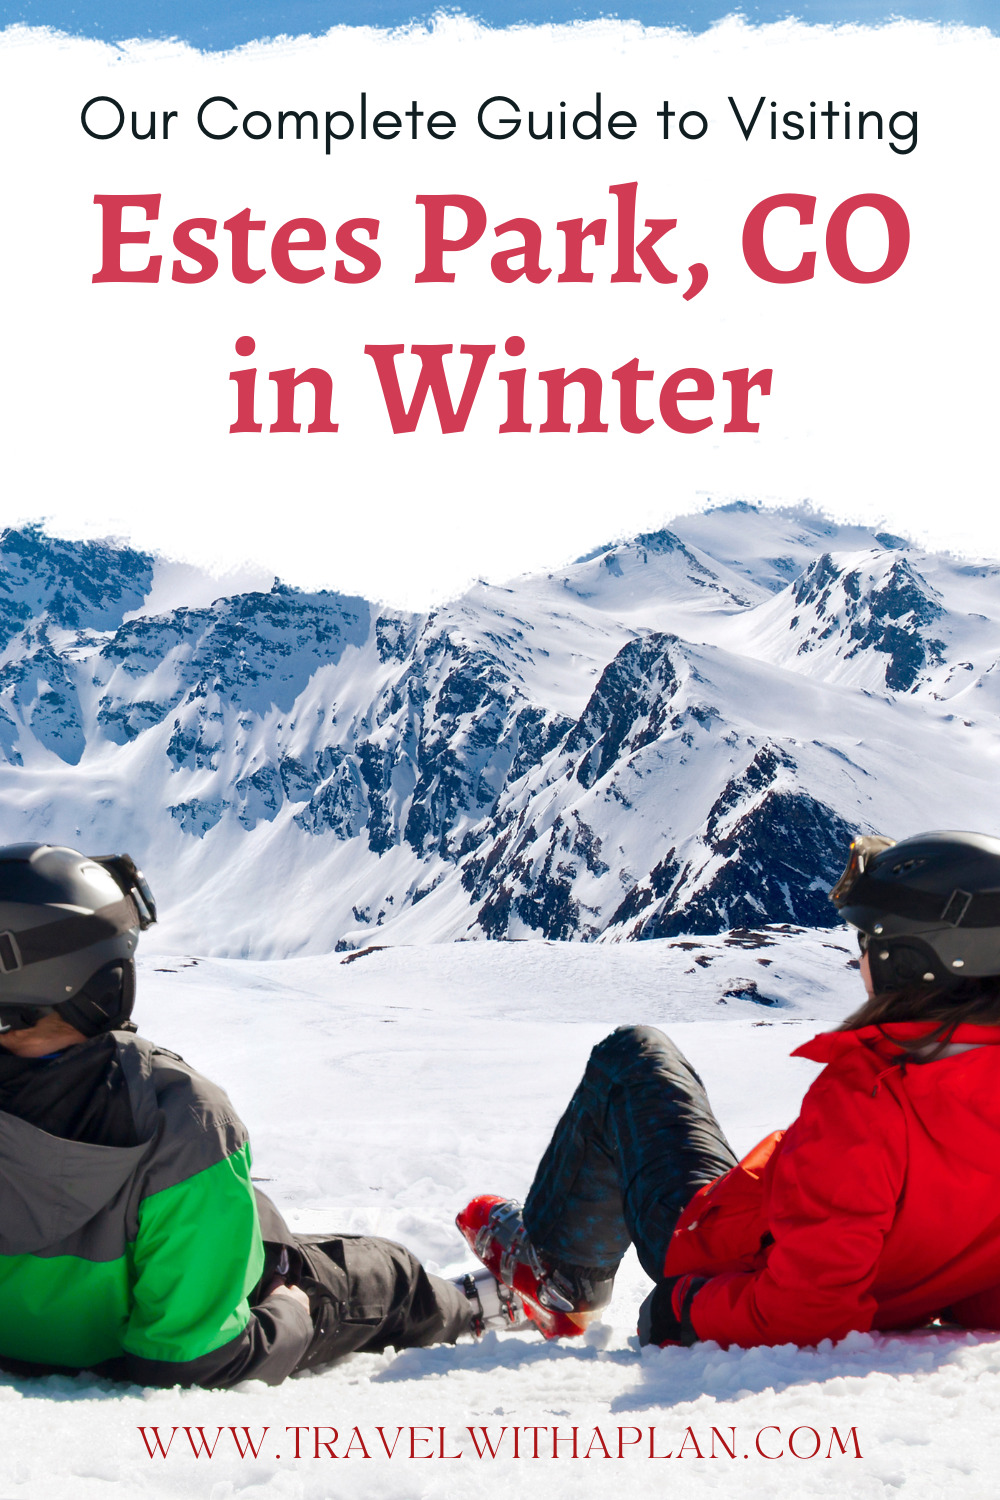 There are so many adventures to be had in Estes Park, Colorado!  Learn the best things to do in Estes Park in winter for a fun-filled holiday.  From sledding, shopping, sipping, and skiing...this place has it all!  #EstesParkCO #Coloradofamilyvacations